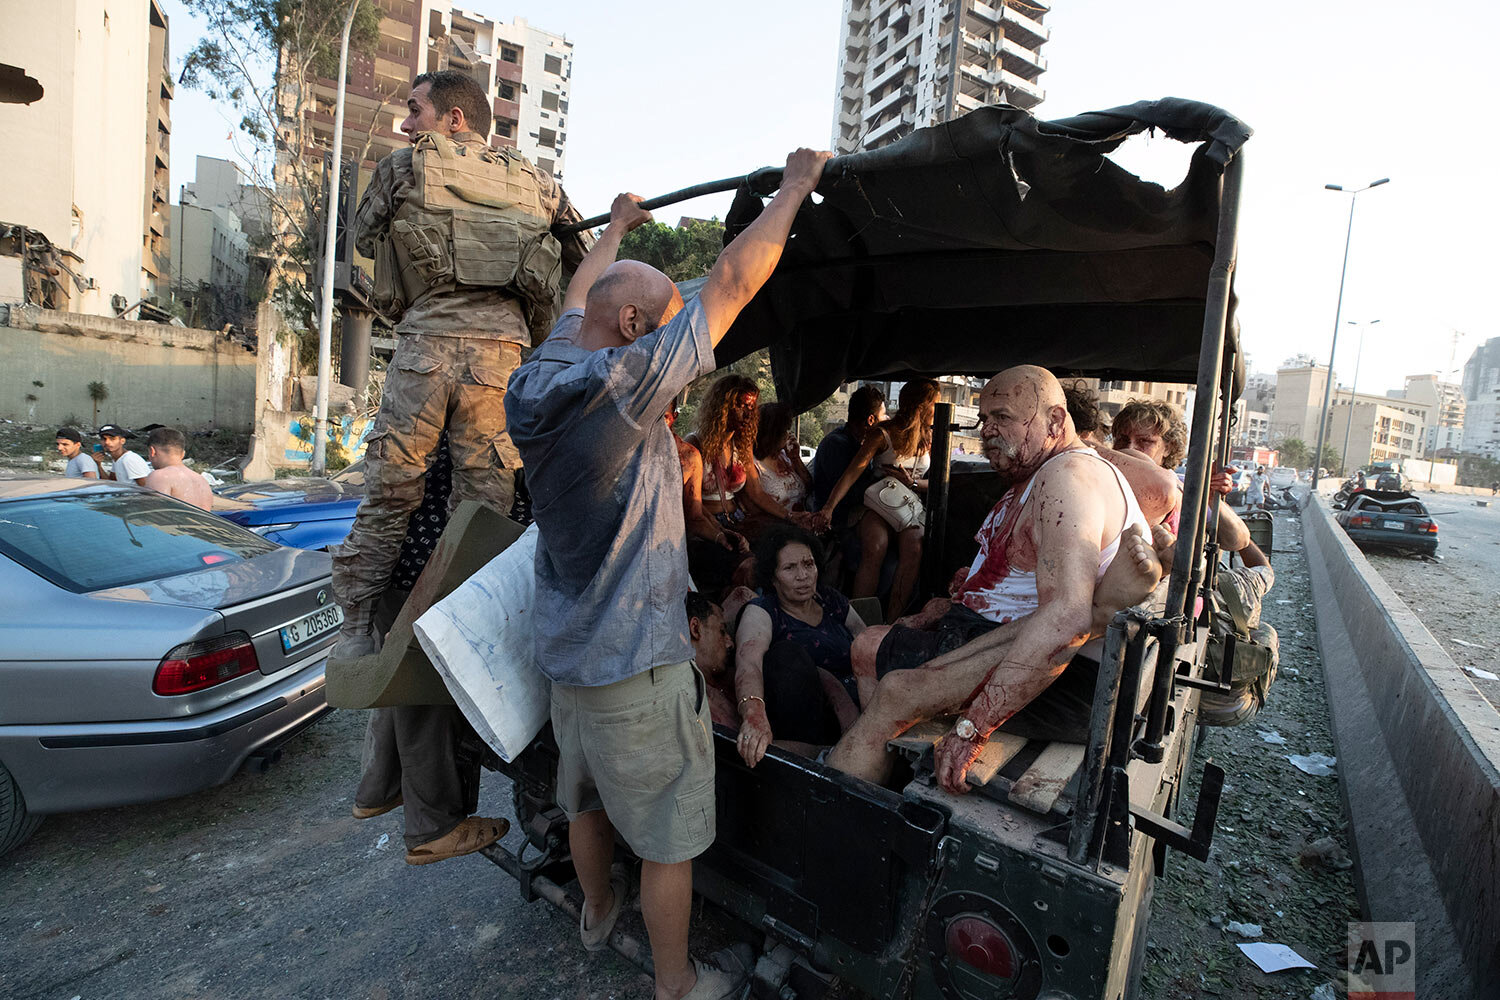  Injured people are evacuated after a massive explosion in Beirut, Lebanon, Tuesday, Aug. 4, 2020. (AP Photo/Hassan Ammar) 